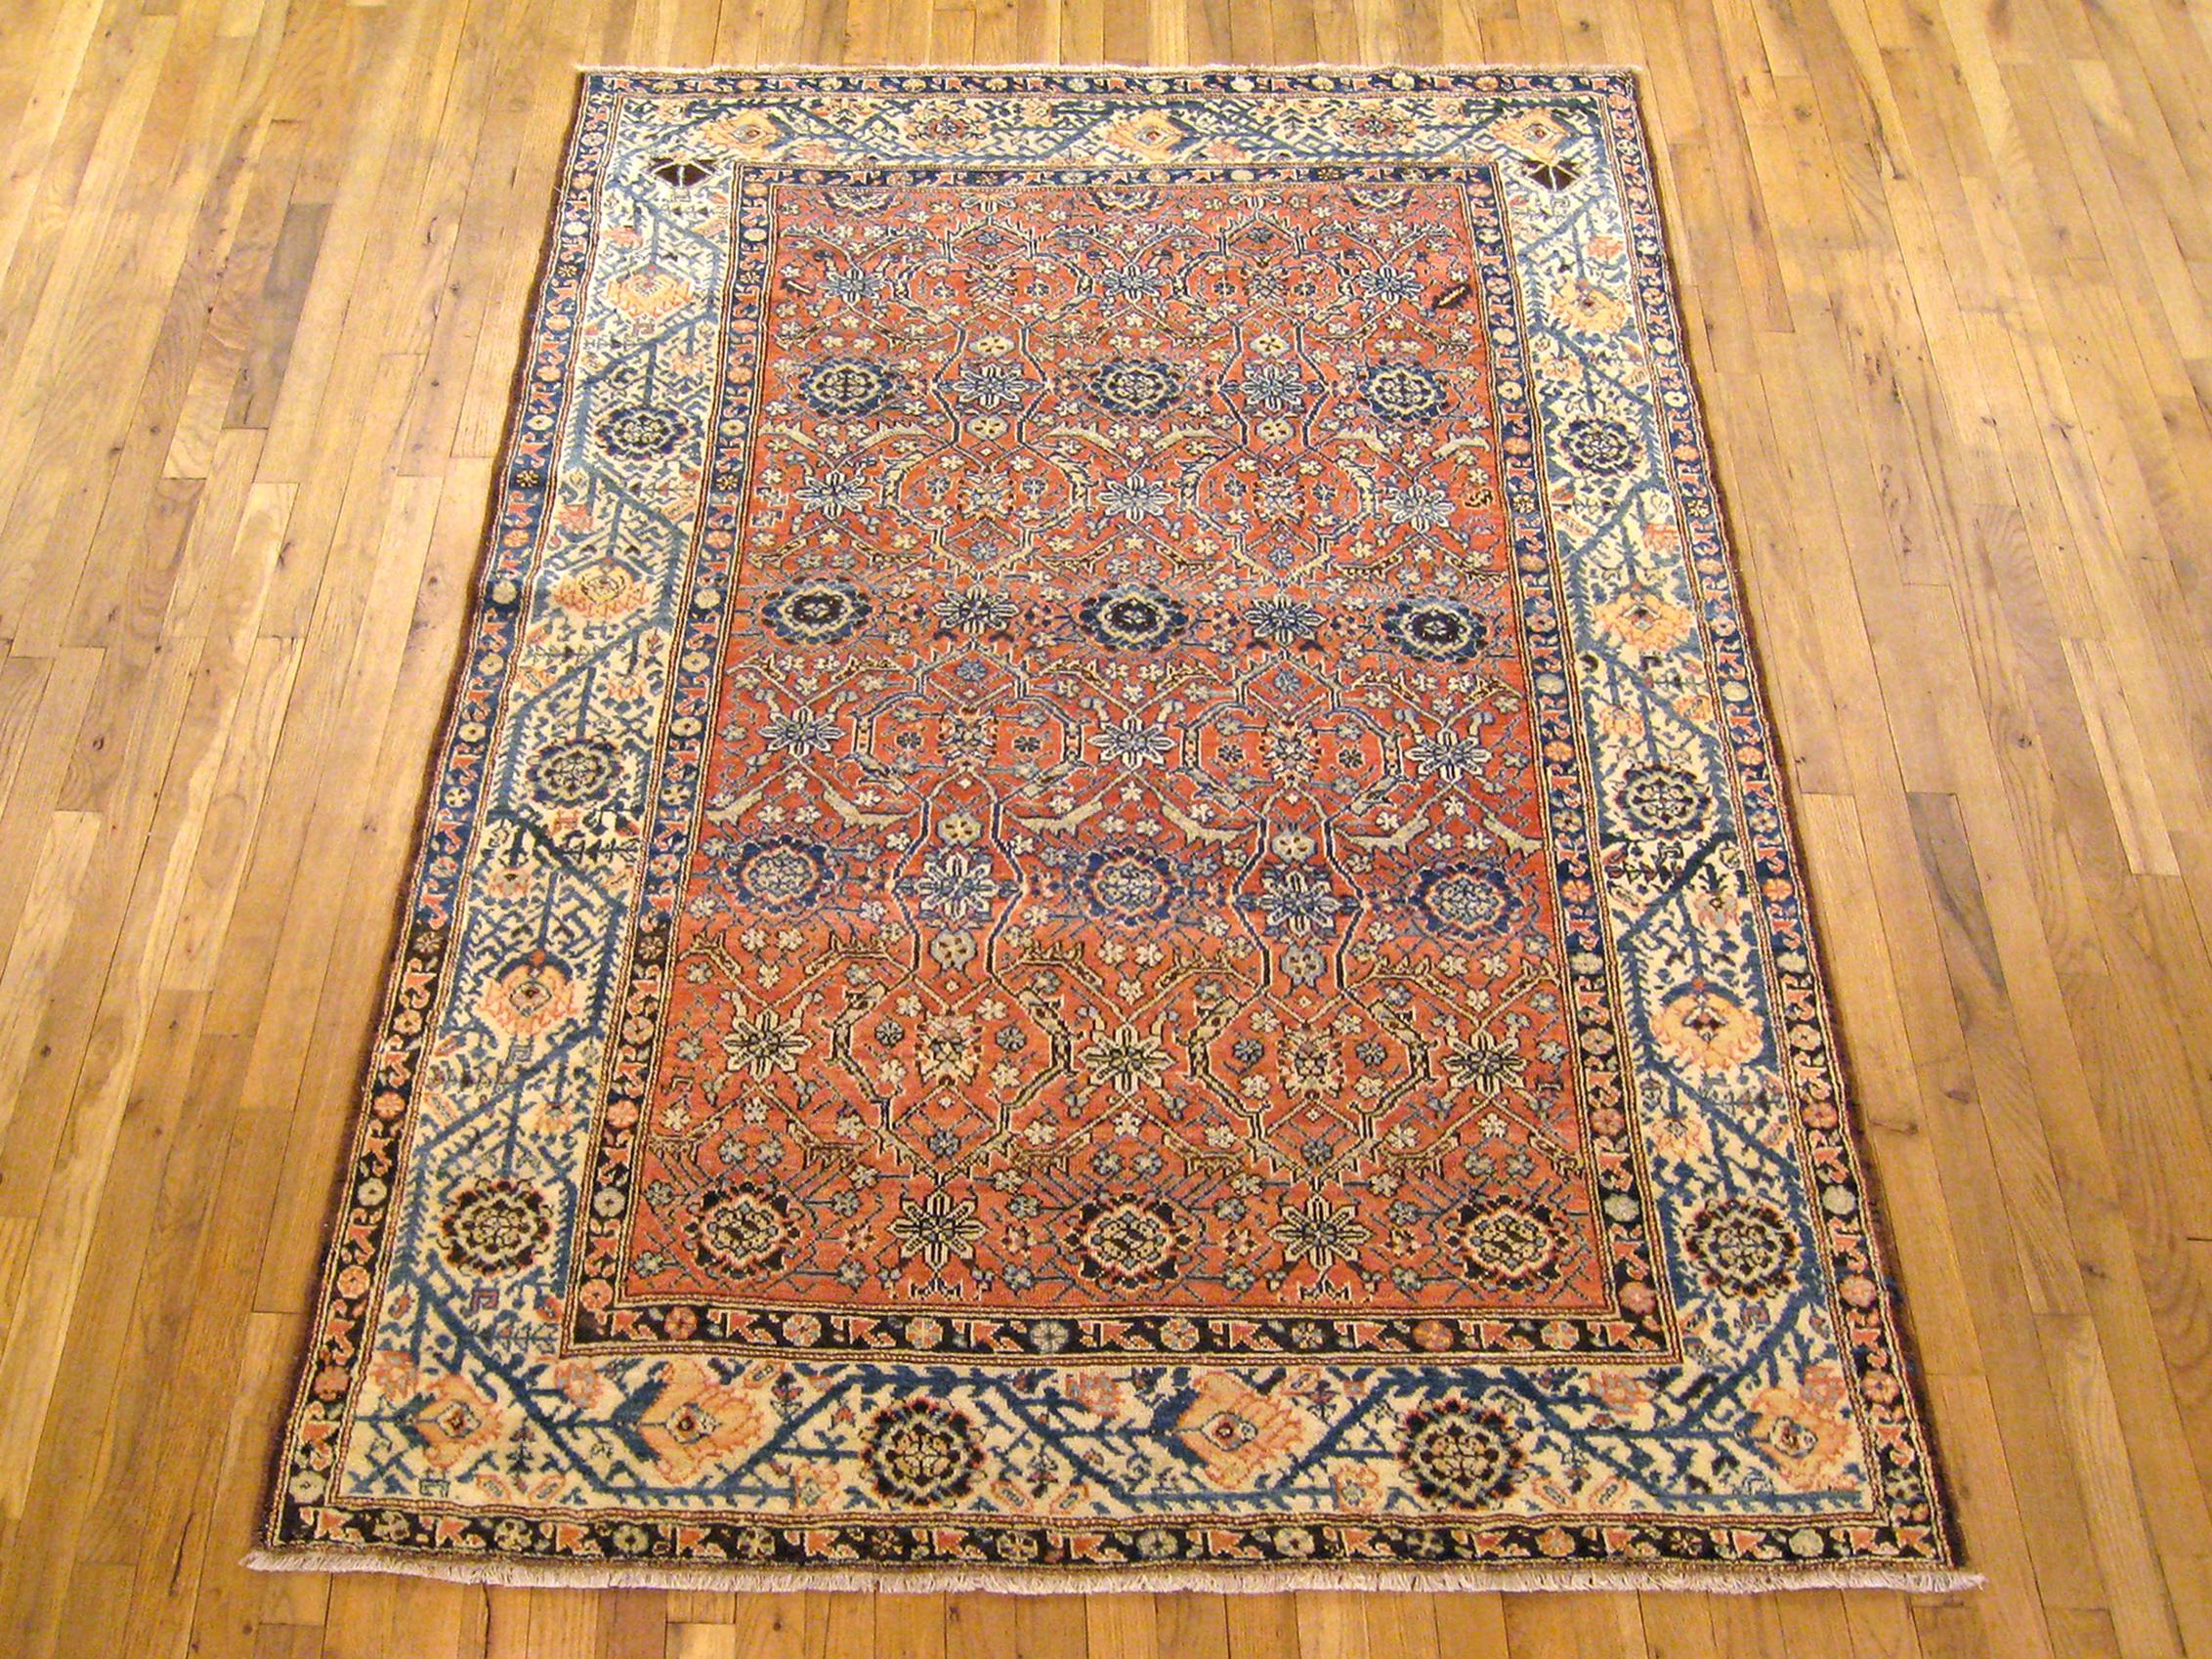 Antique Persian Malayer Oriental Rug in Small Size

An antique Persian Malayer oriental rug, circa 1910. Size 6'3